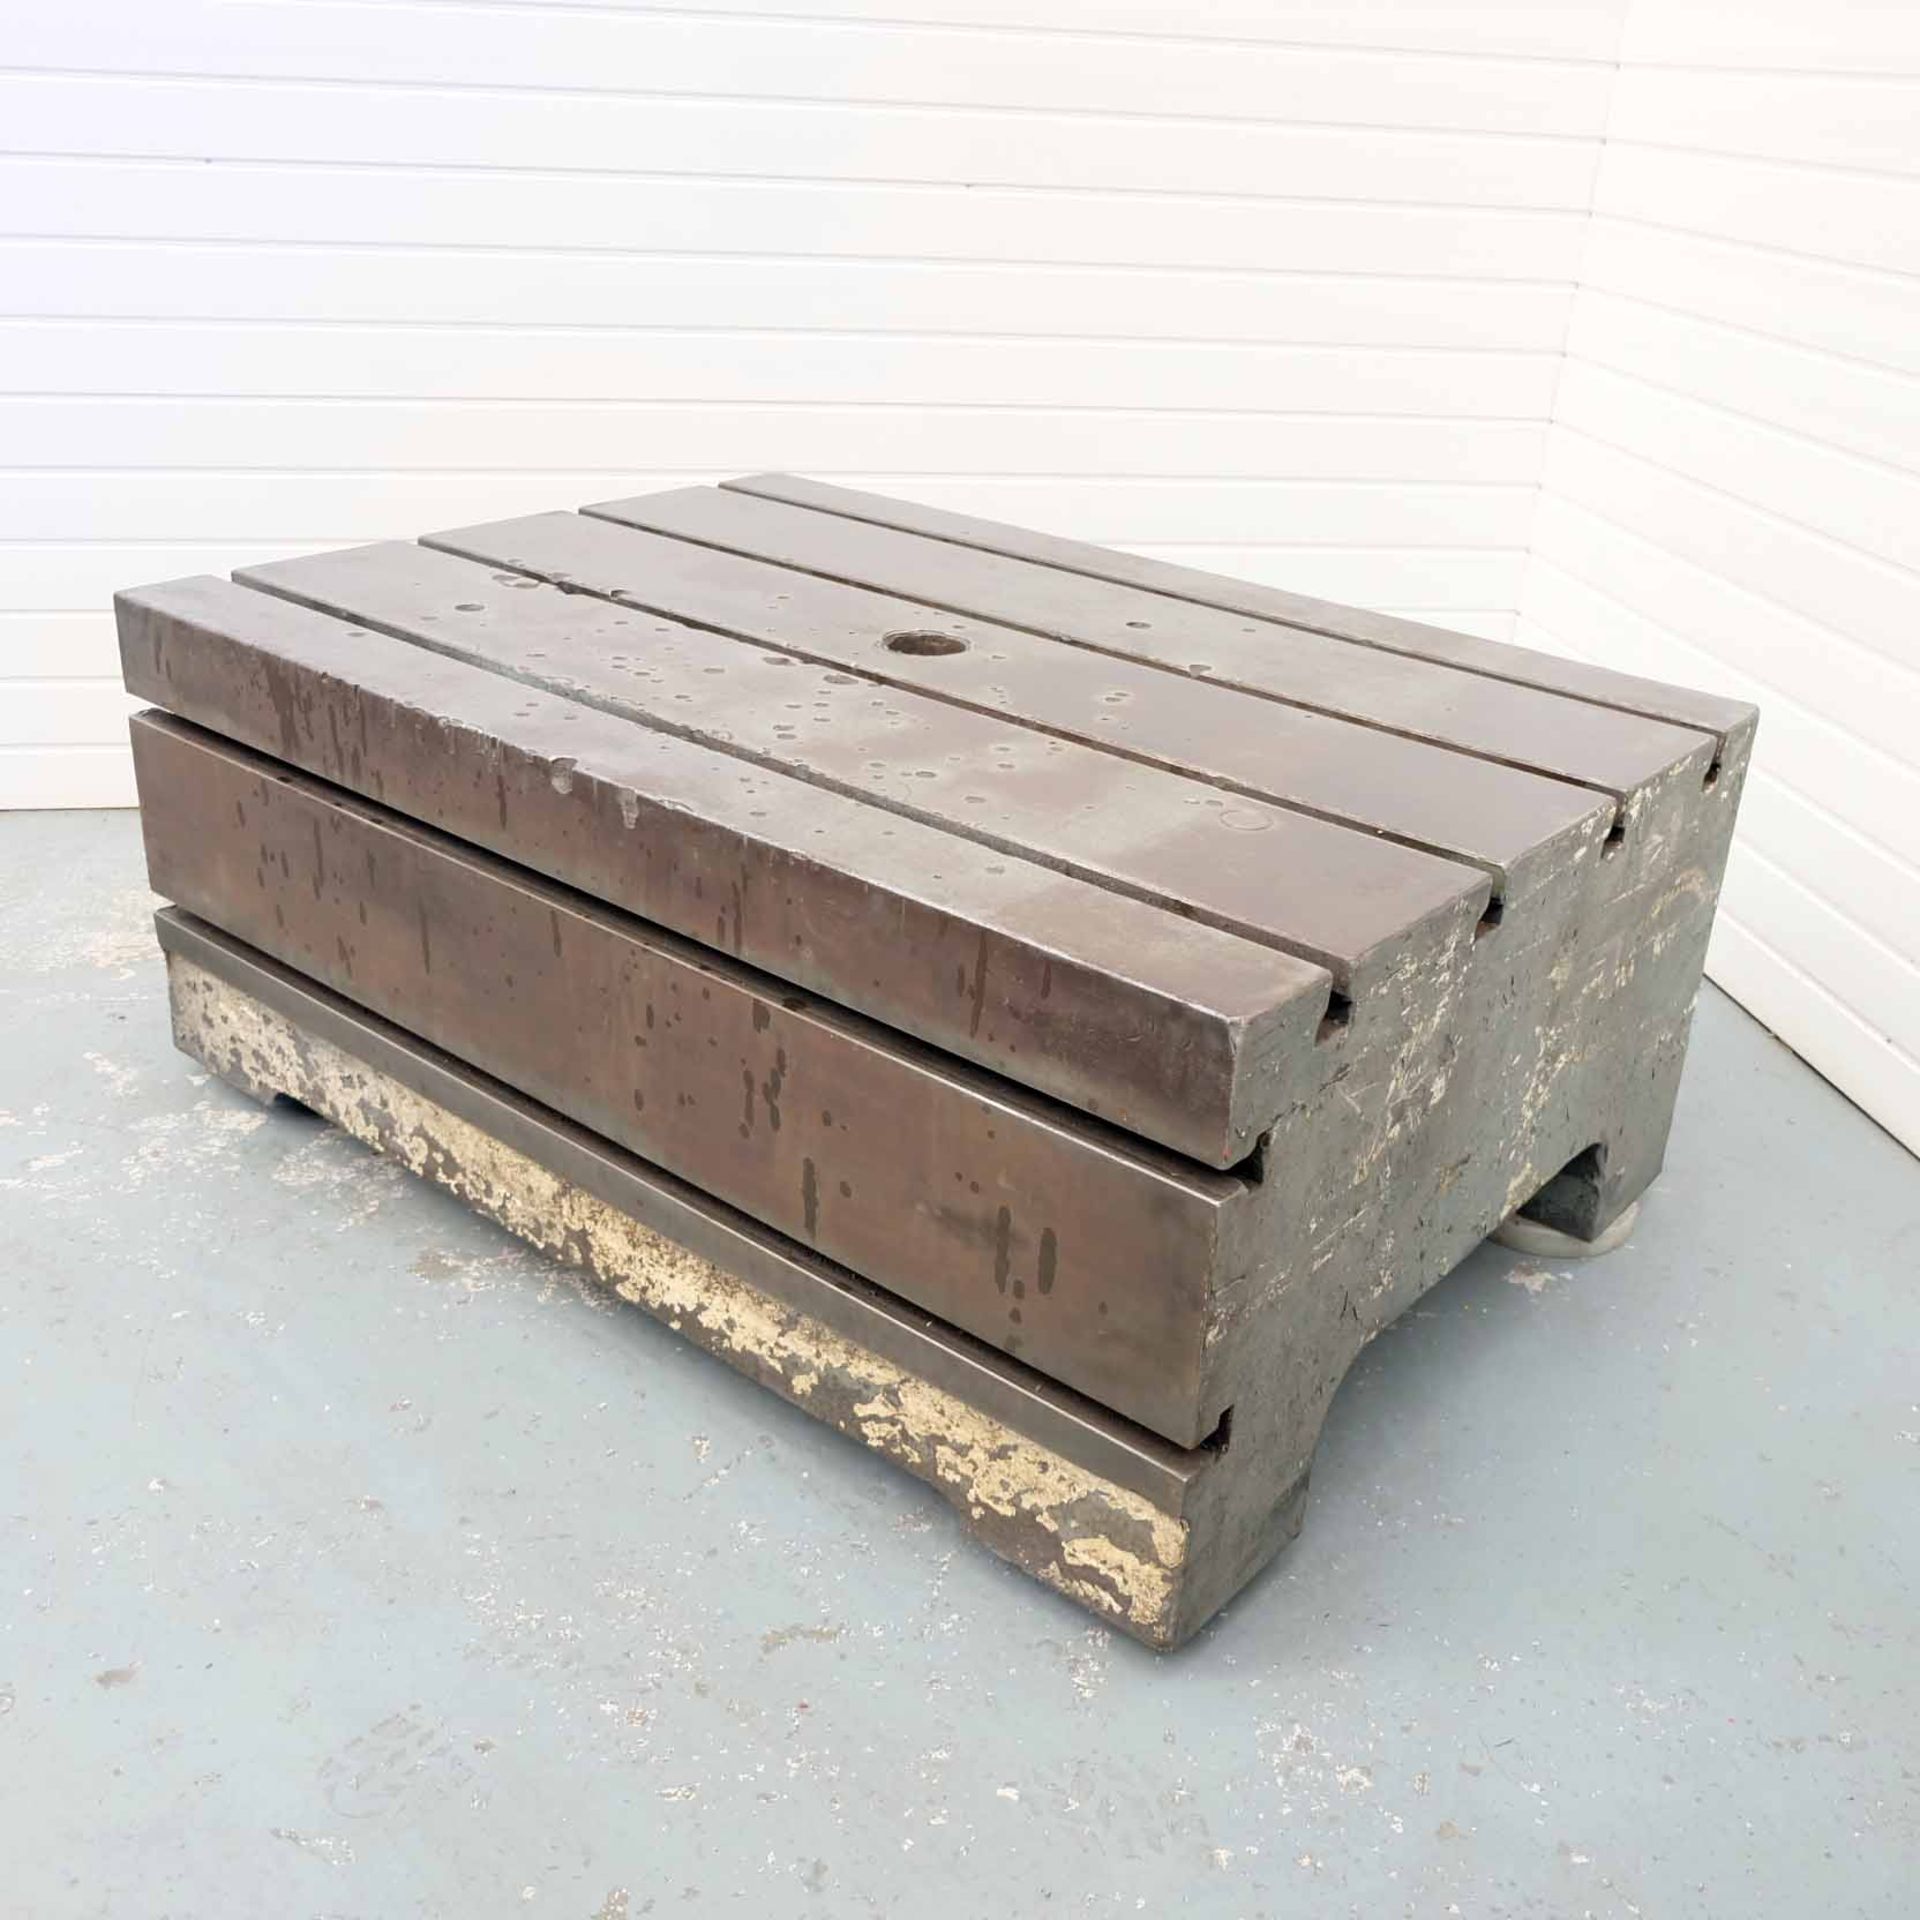 Tee Slotted Box Table. Size 51" x 36" x 20" High. 4 Tee Slots on Top. 2 Tee Slots on Front. - Bild 2 aus 4